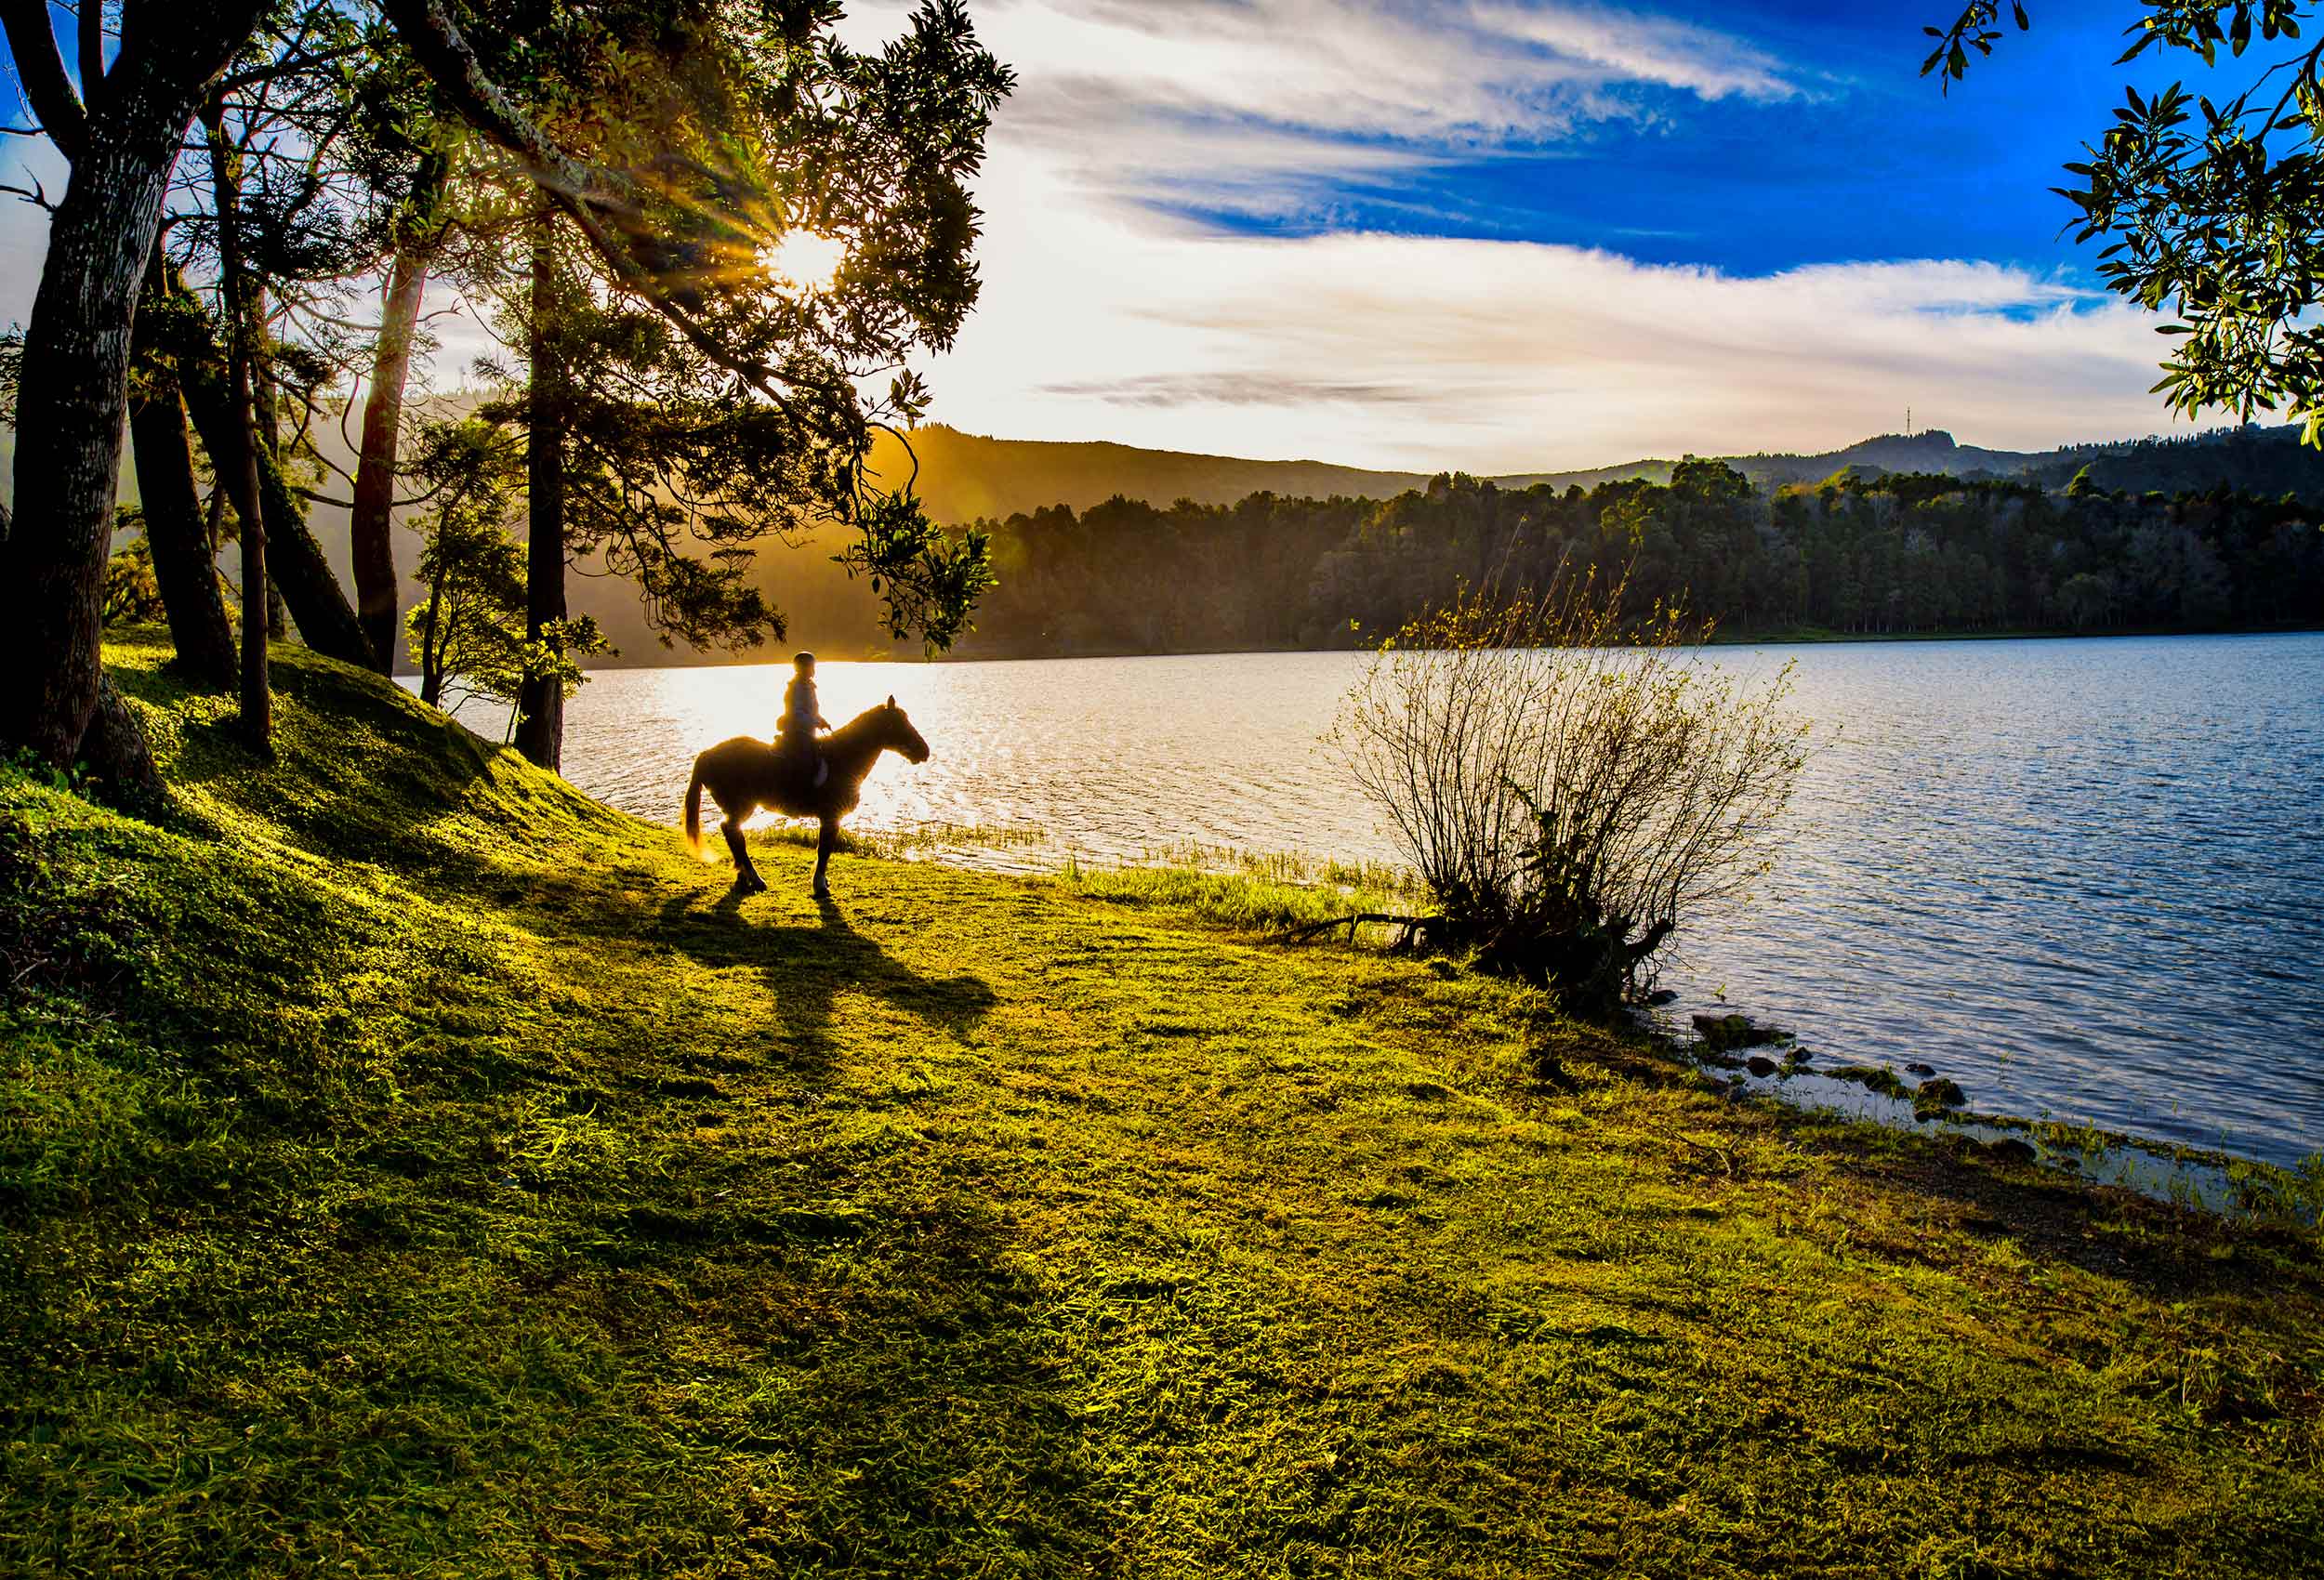 a horse and its rider rest by the water near lagoa azul on the island of sao miguel portugal